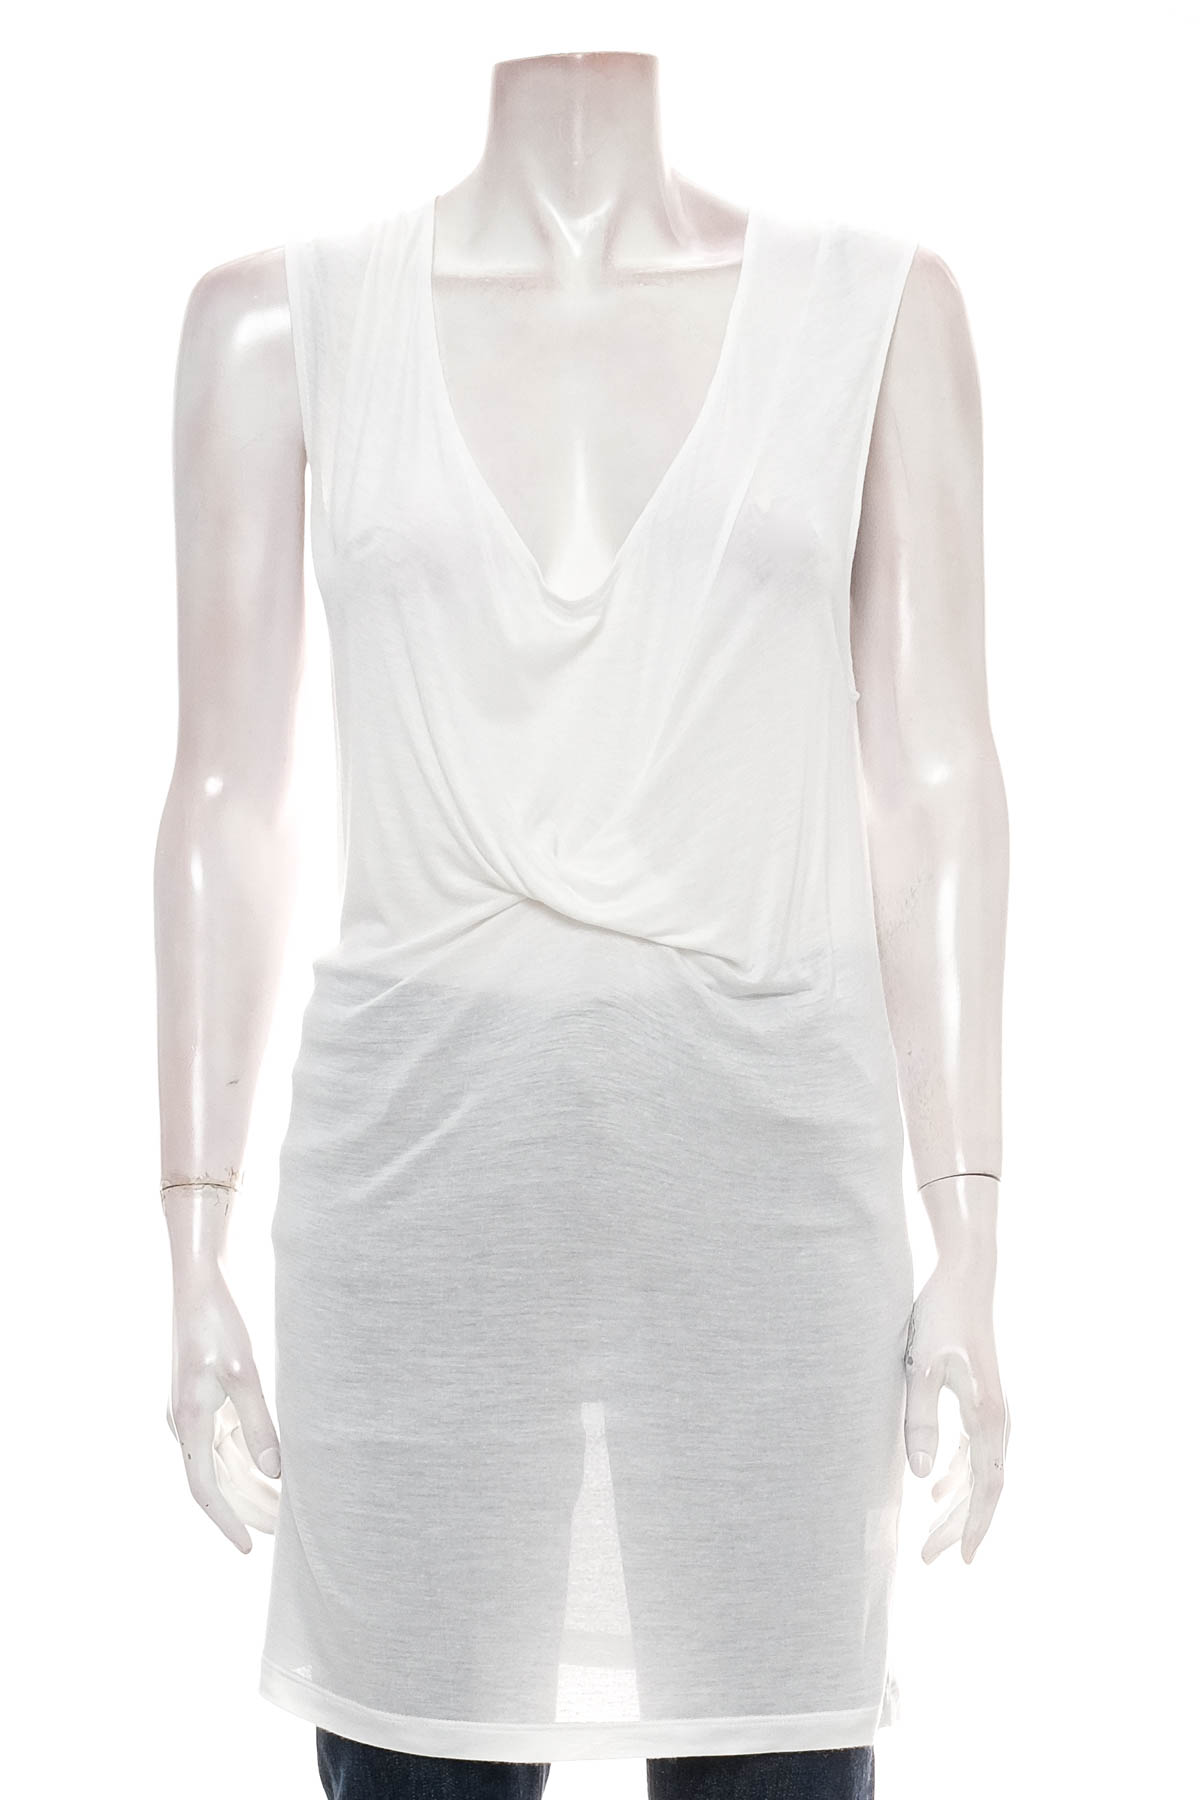 Women's top - ALLUDE - 0